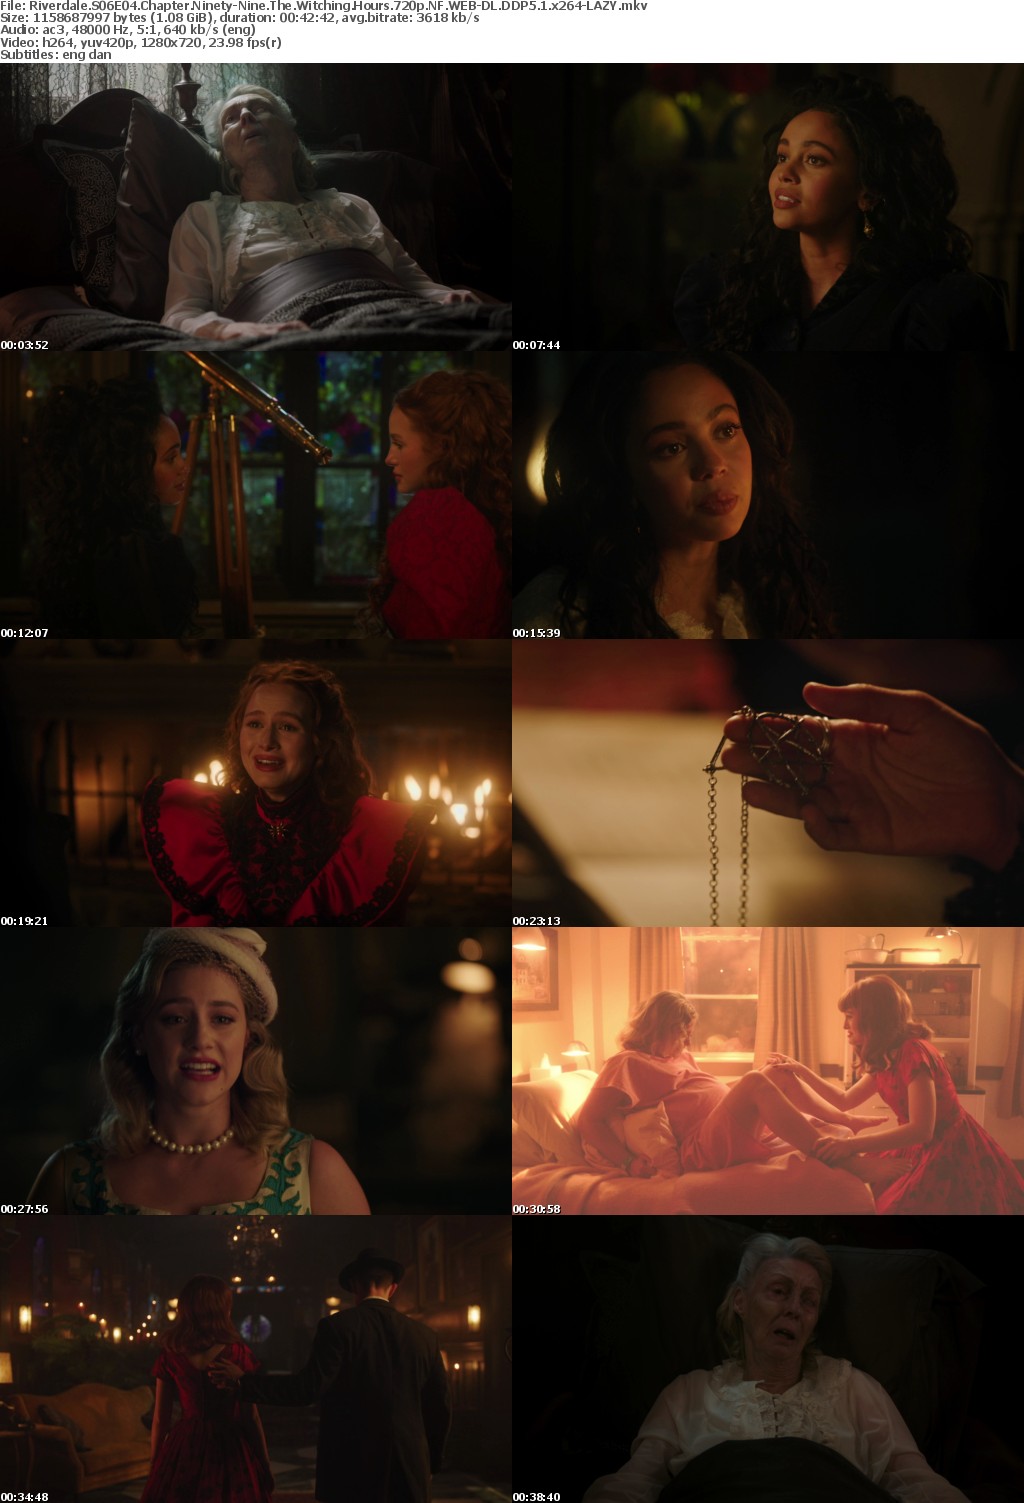 Riverdale US S06E04 Chapter Ninety-Nine The Witching Hours 720p NF WEBRip DDP5 1 x264-LAZY